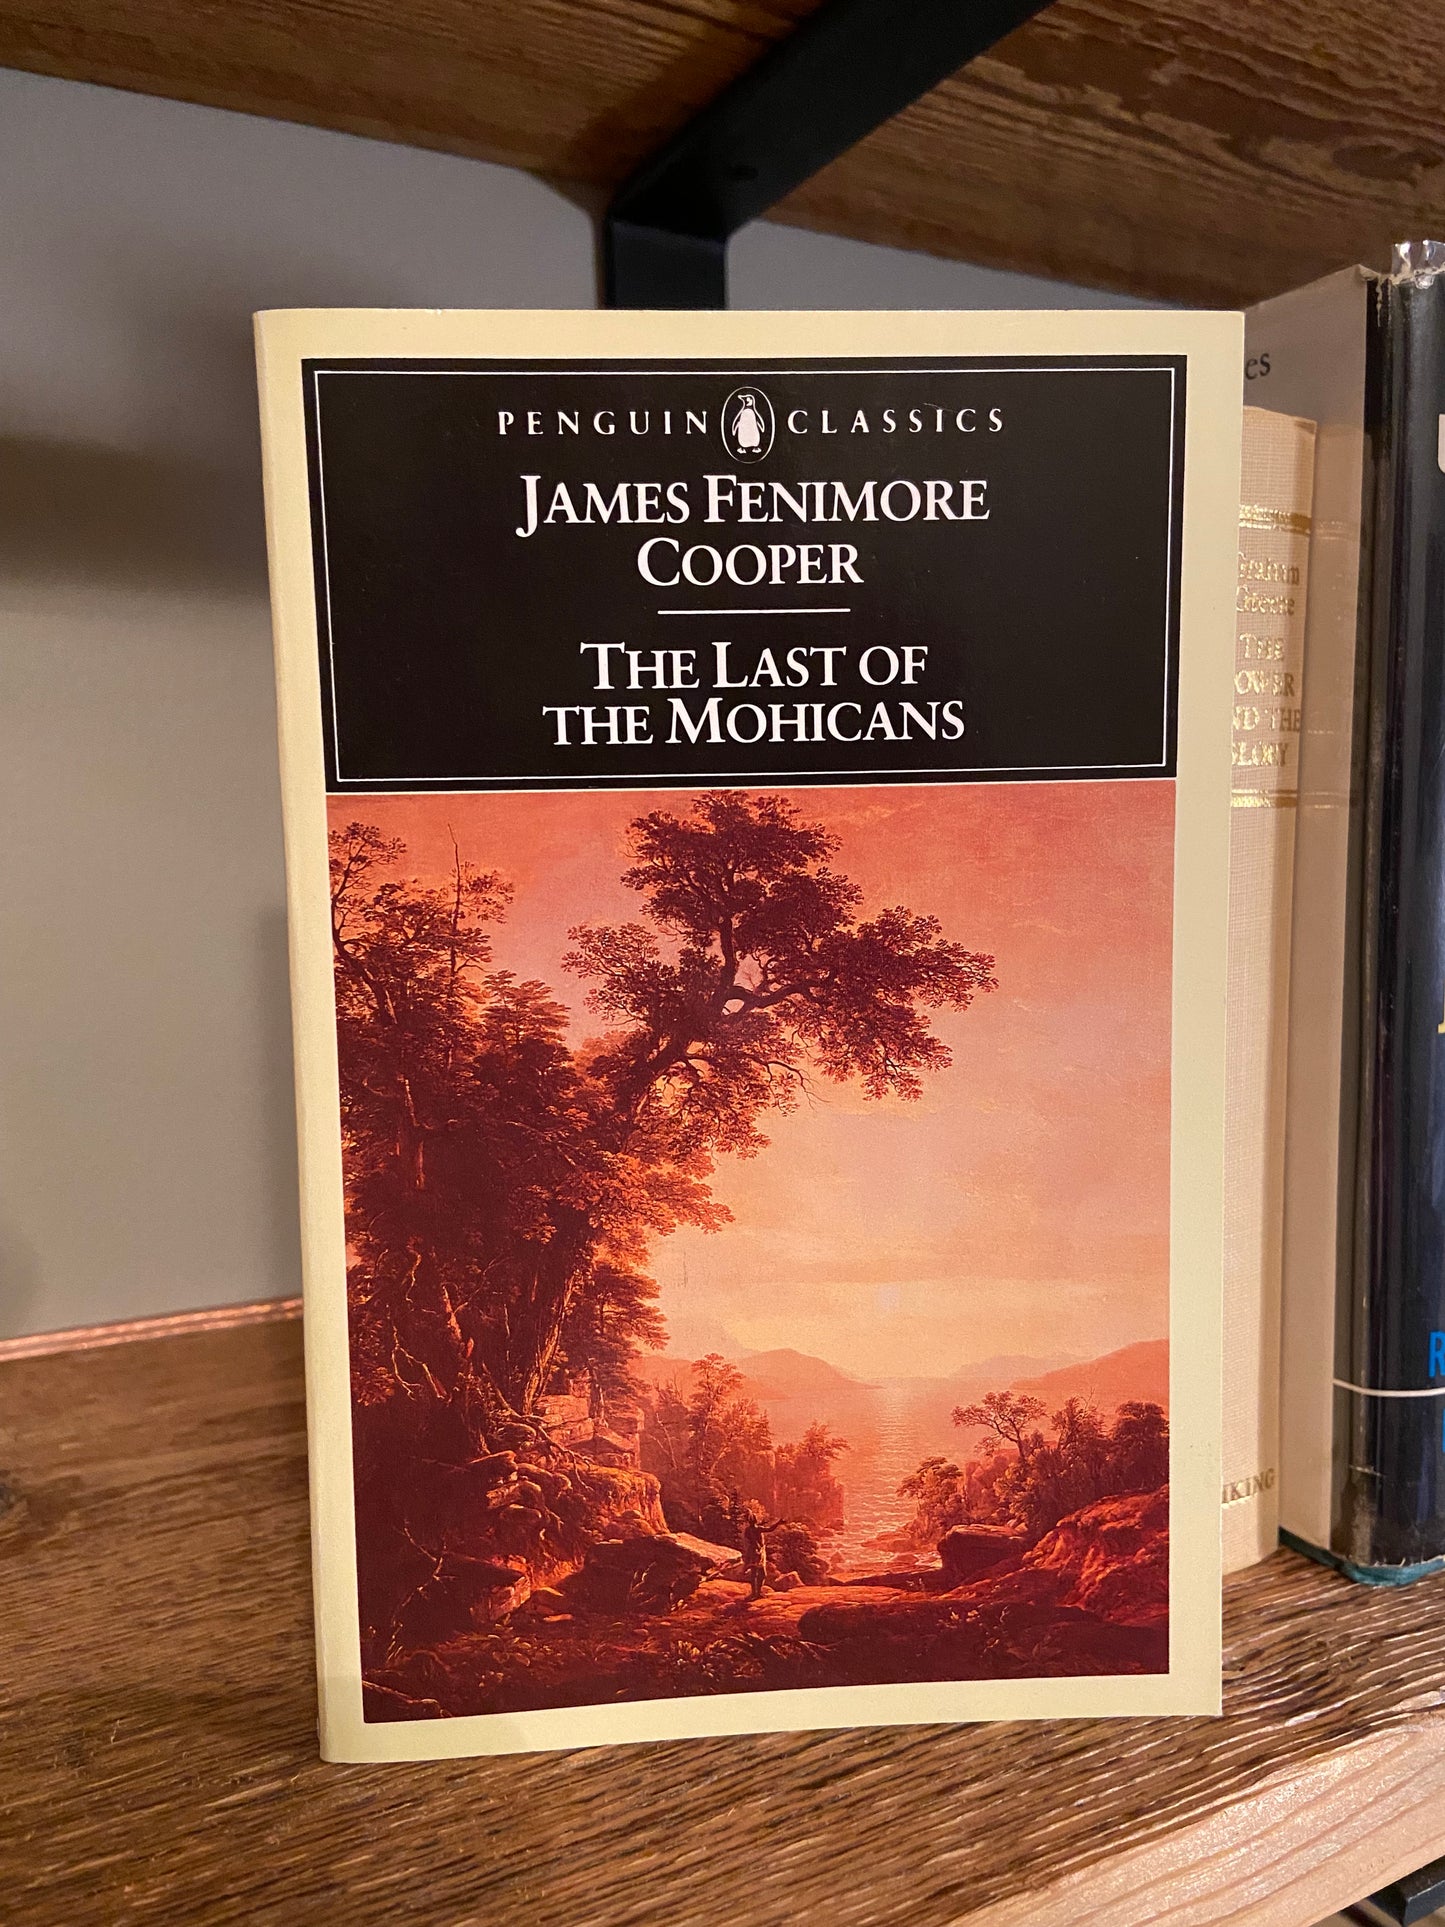 The Last of the Mohicans: by James Fenimore Cooper